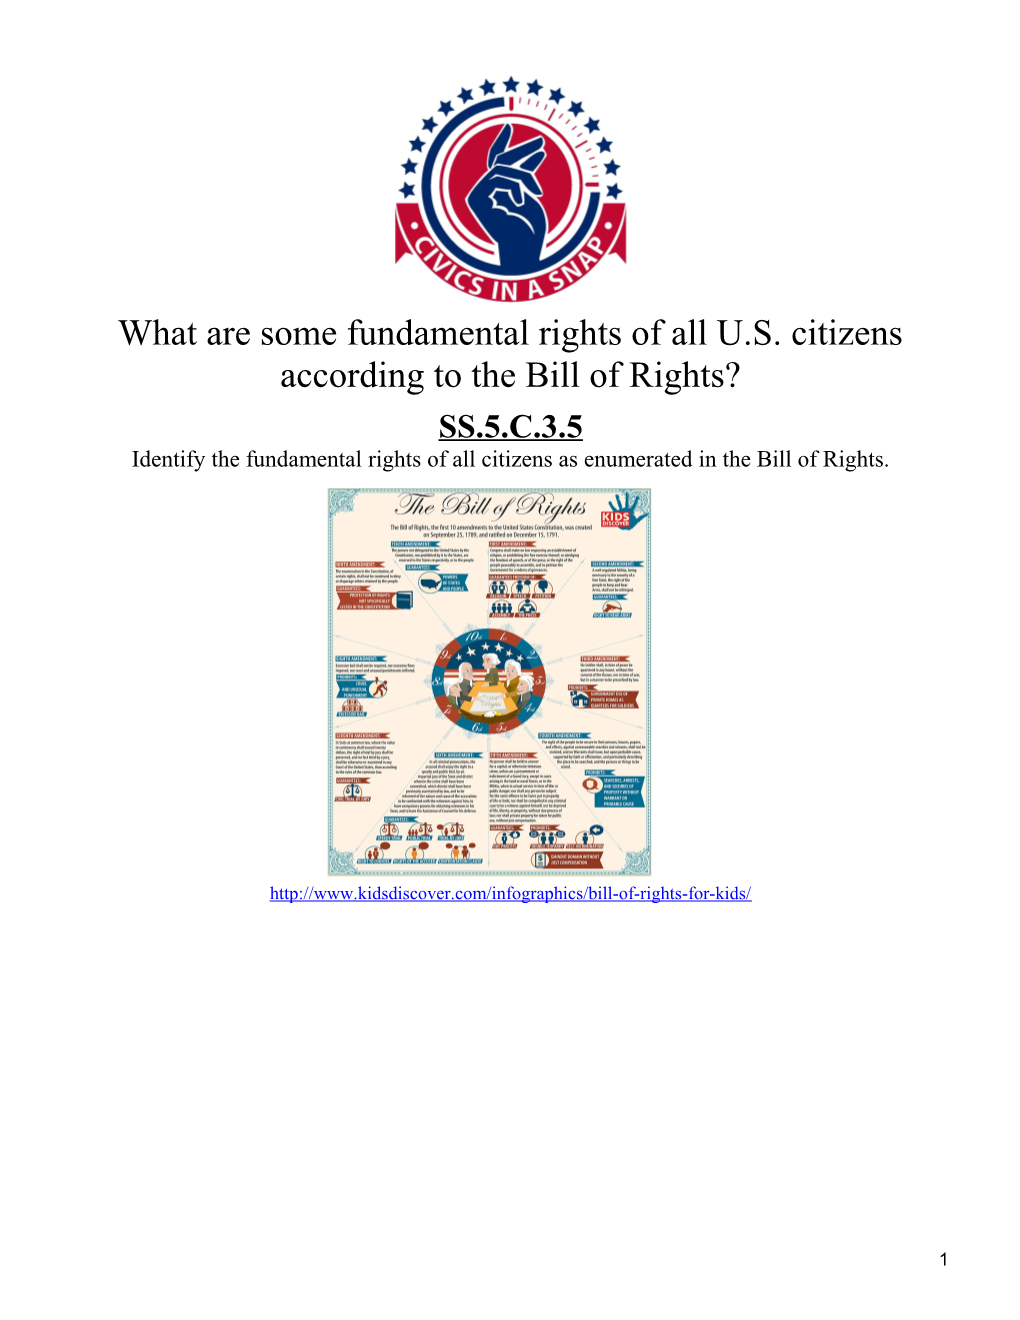 What Are Some Fundamental Rights of All U.S. Citizens According to the Bill of Rights?